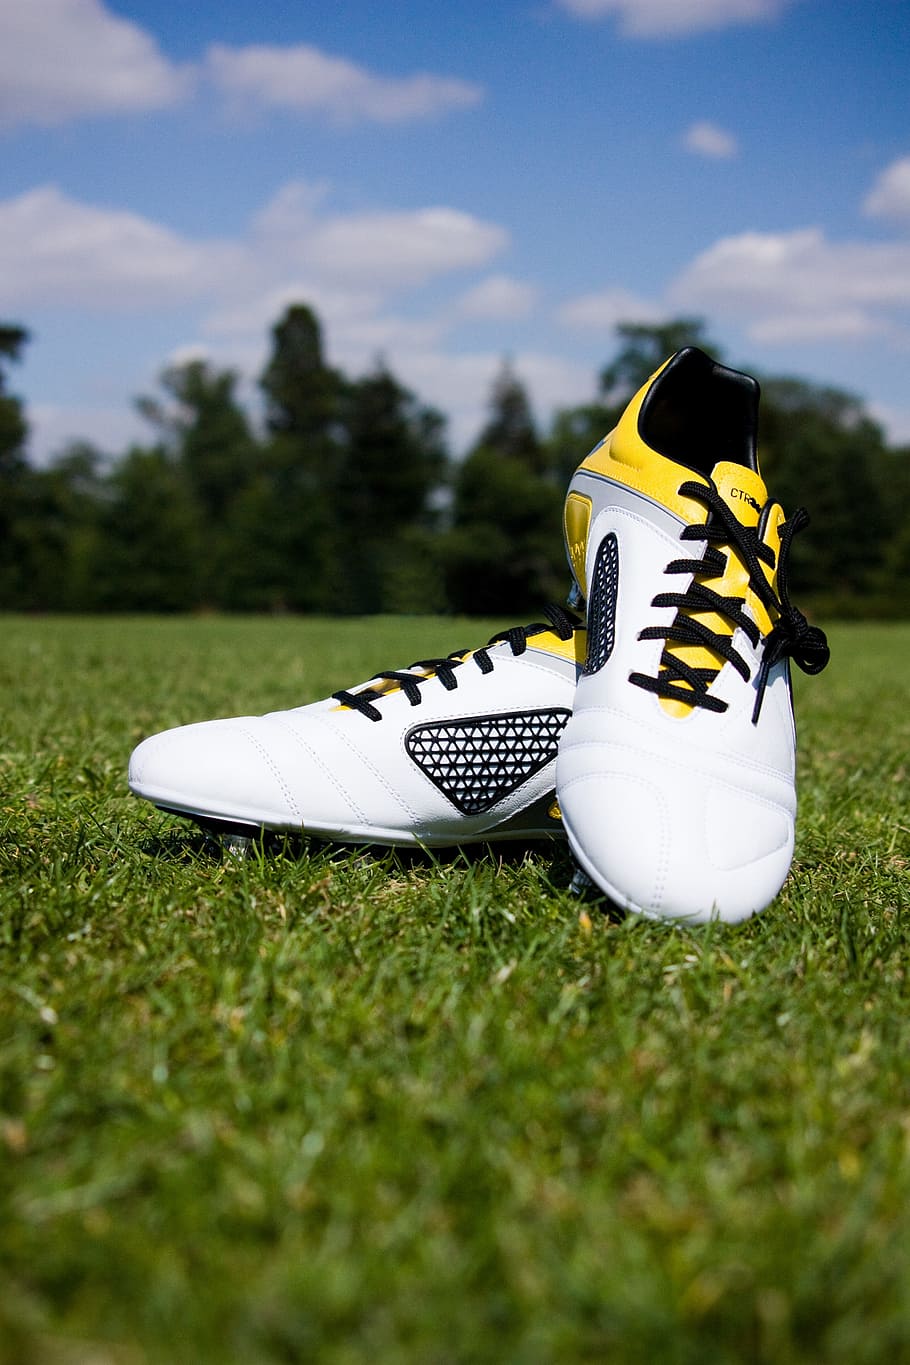 pair of white-and-yellow cleats on green grass, Football, Boots, HD wallpaper